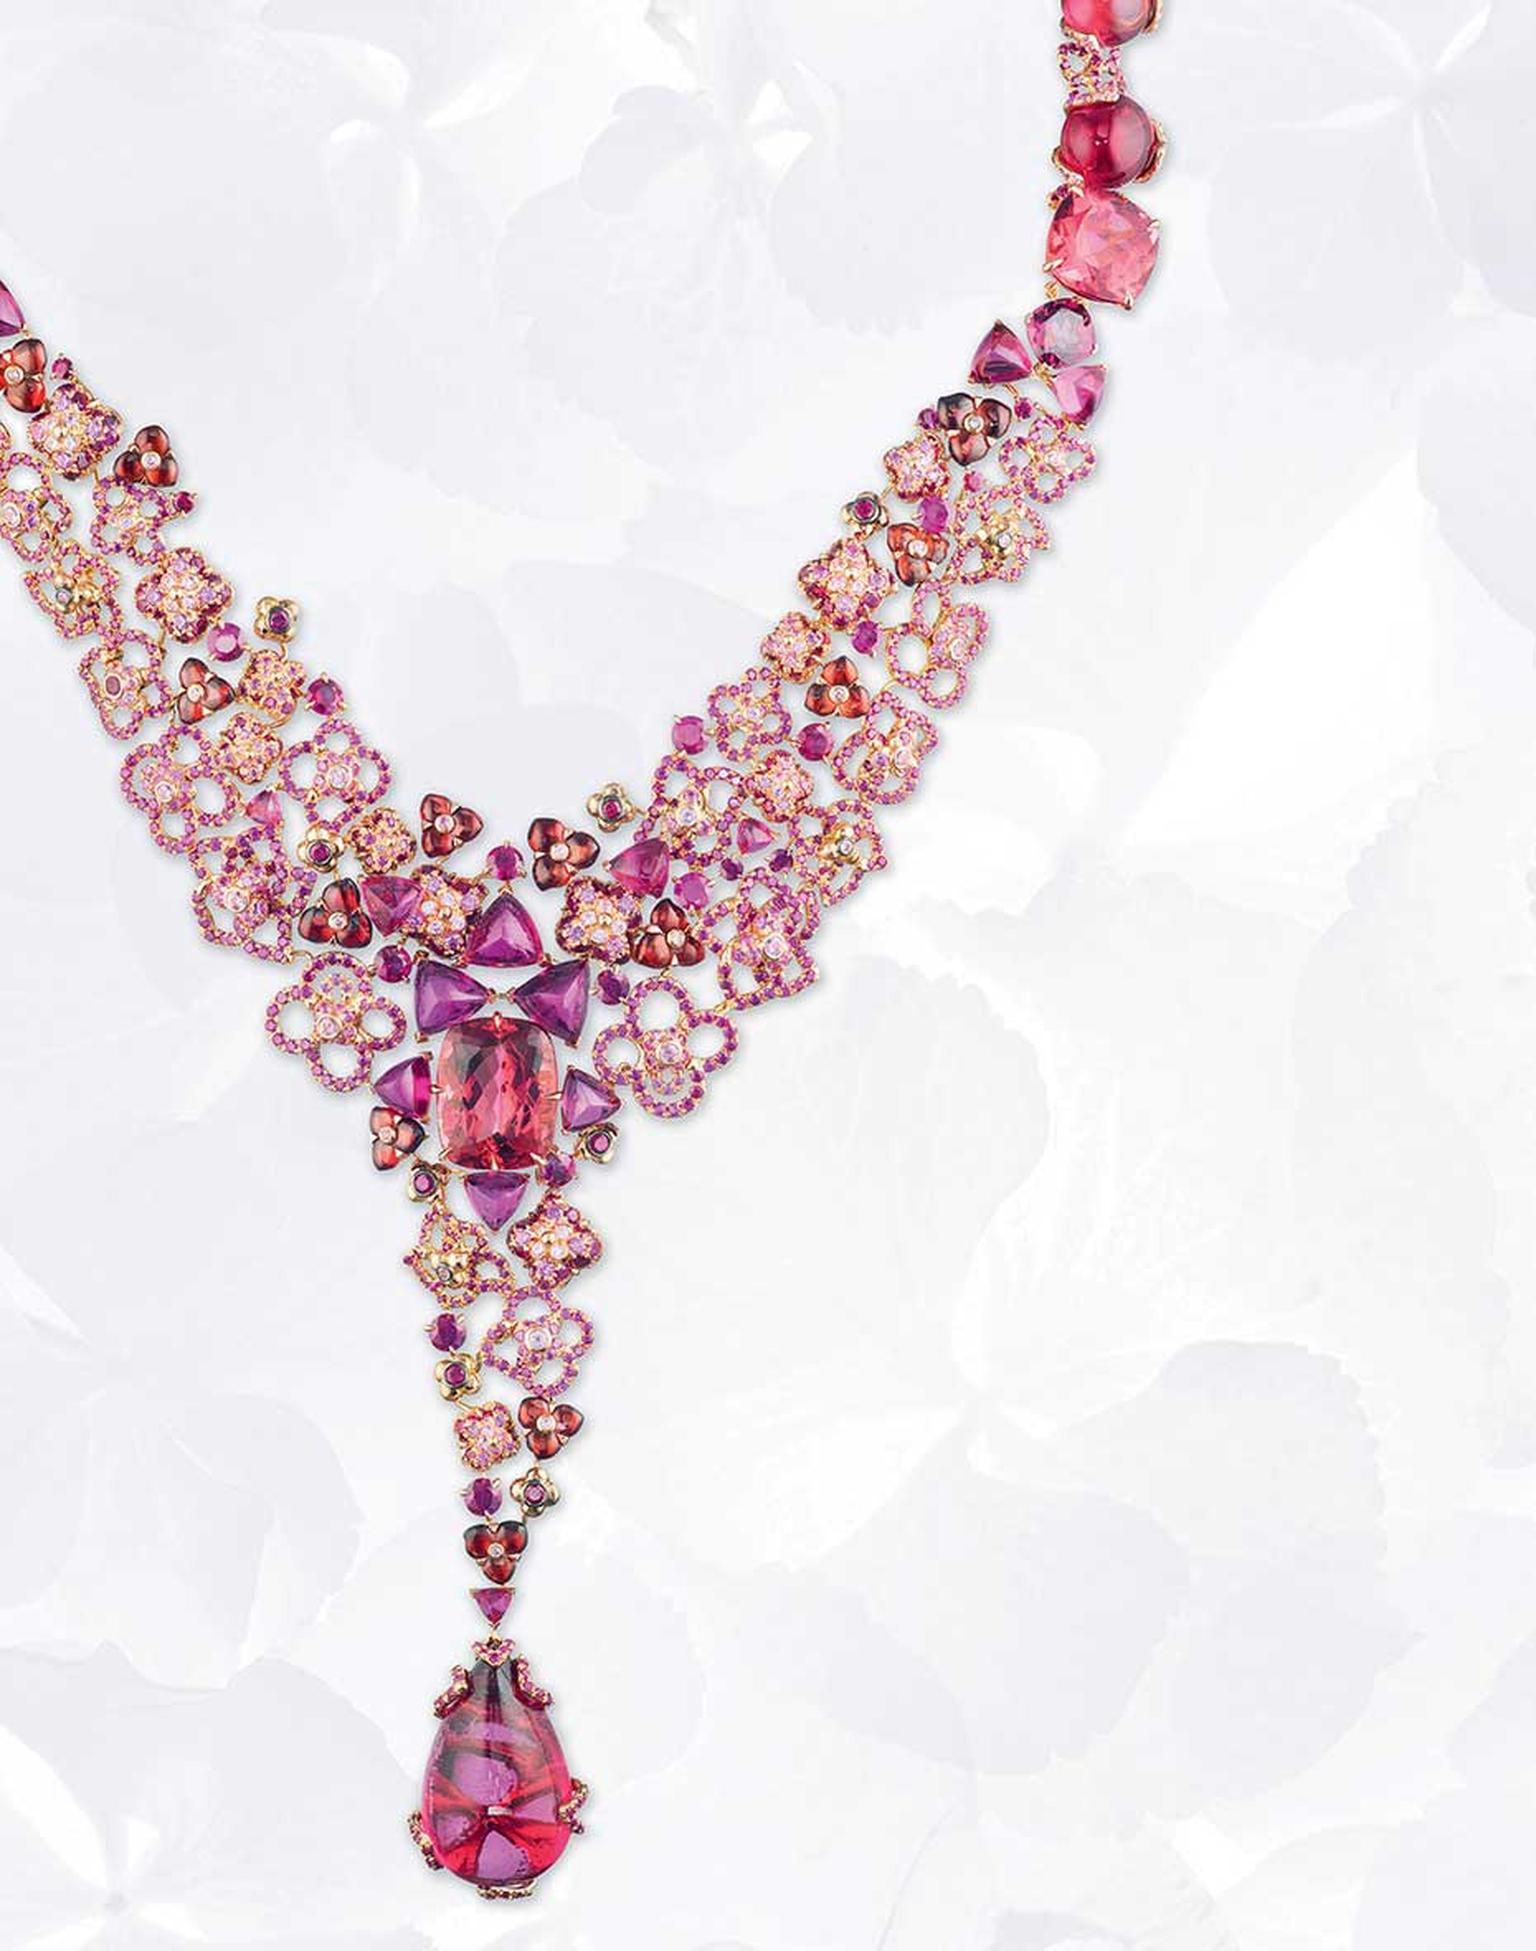 Louis Vuitton's New High Jewelry Collection Is Literally Out of